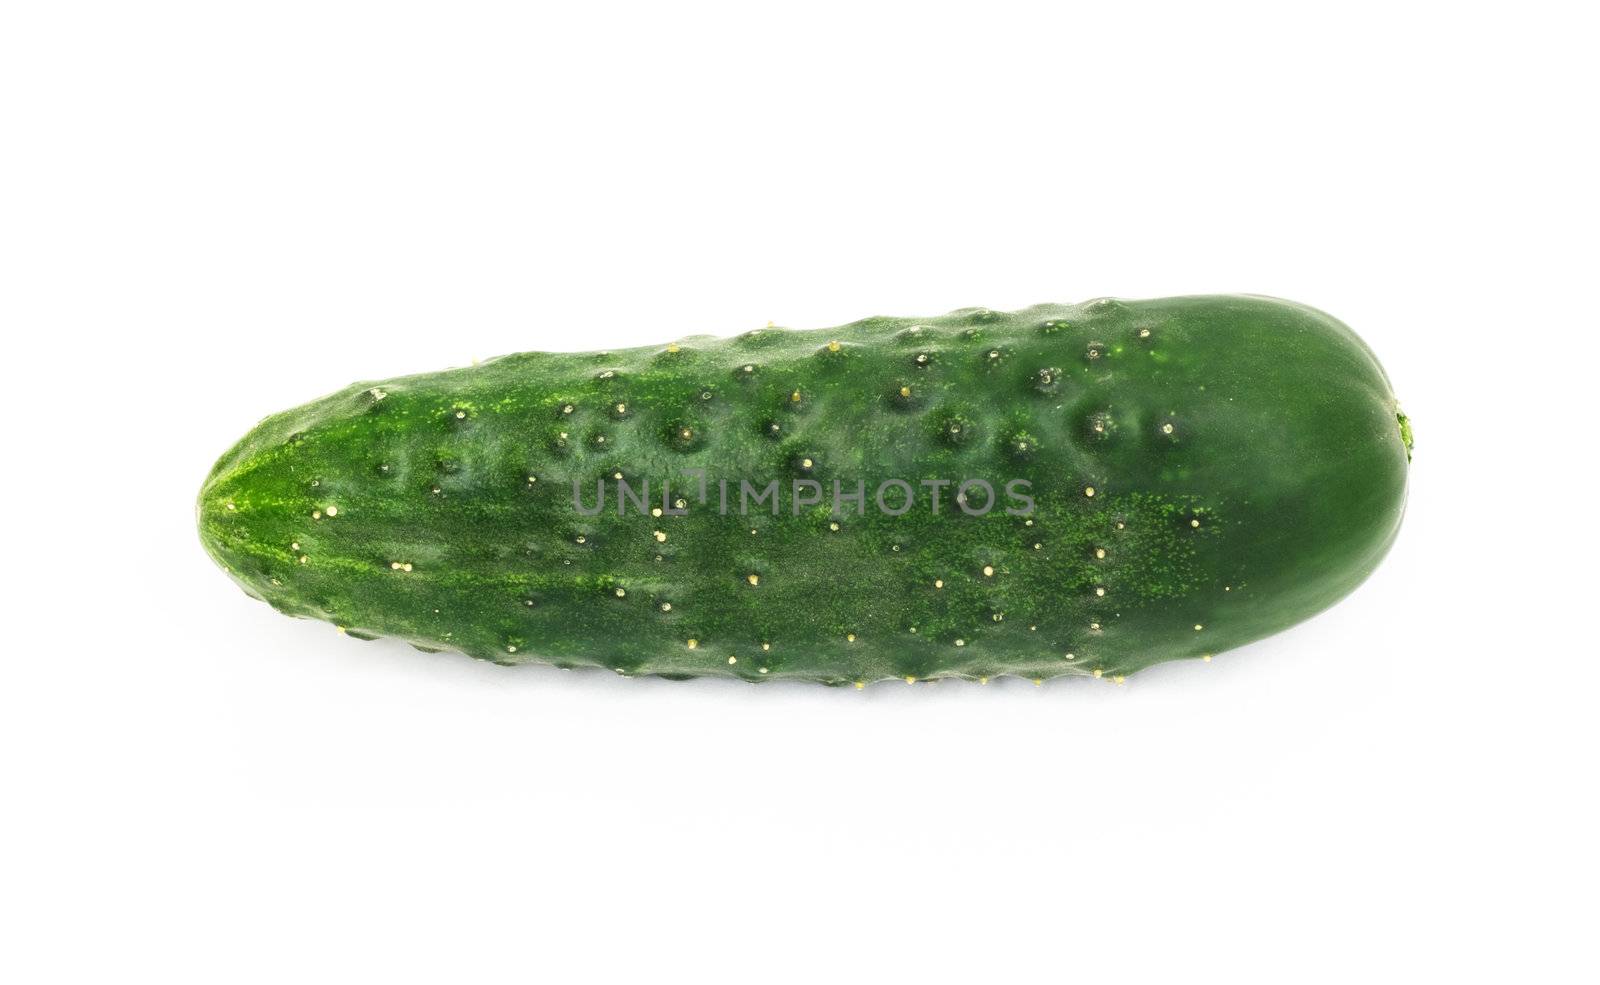 green cucumber, isolated on white background 